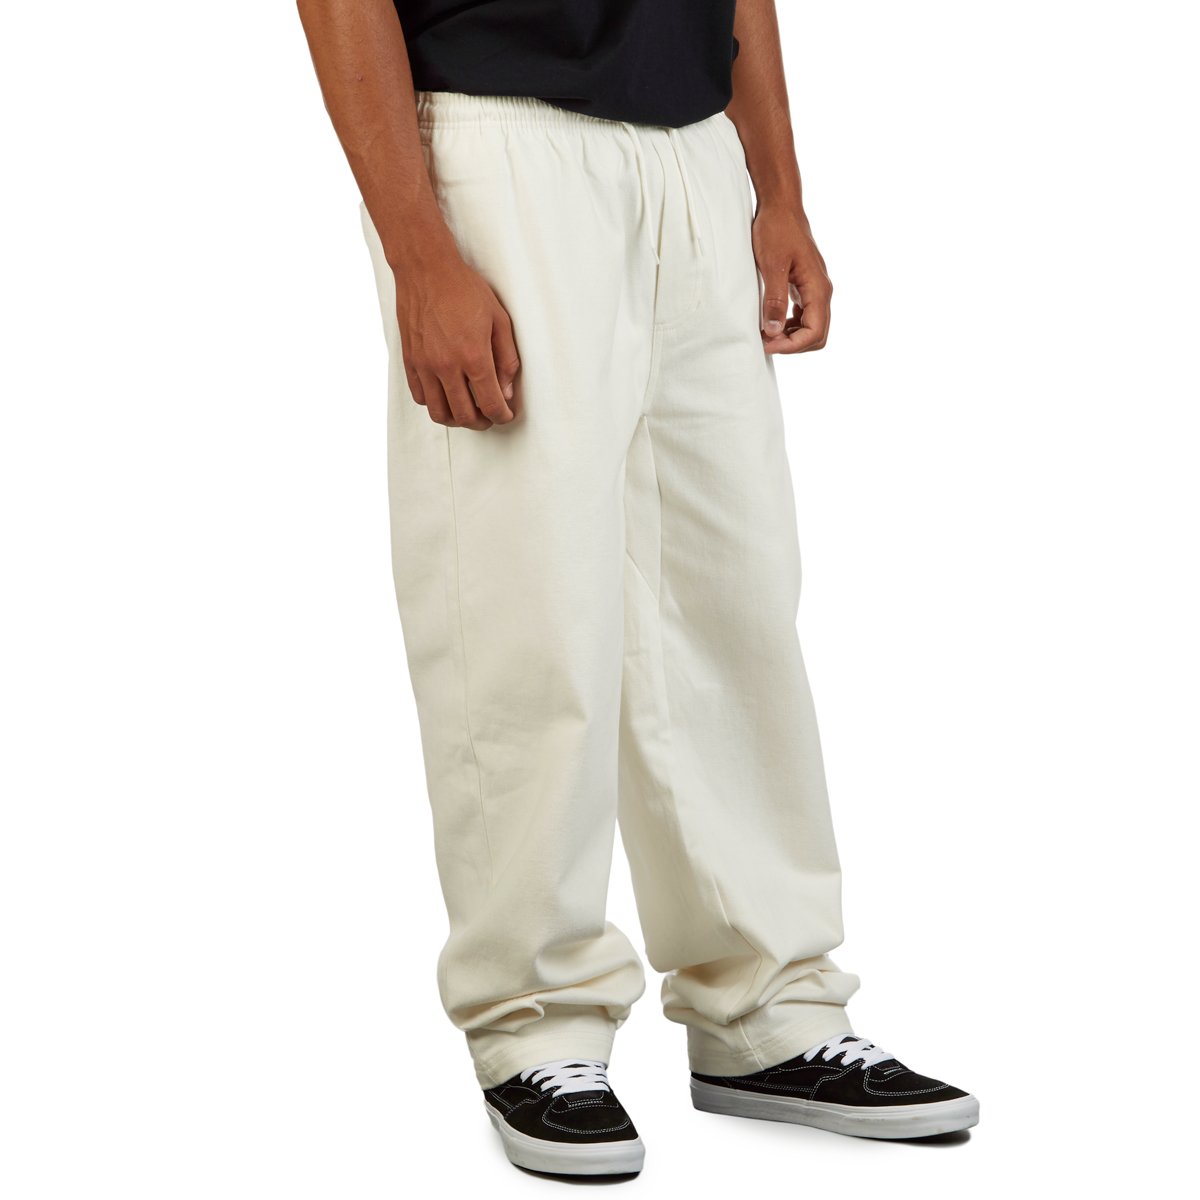 CCS Easy Twill Pants - Off White image 1